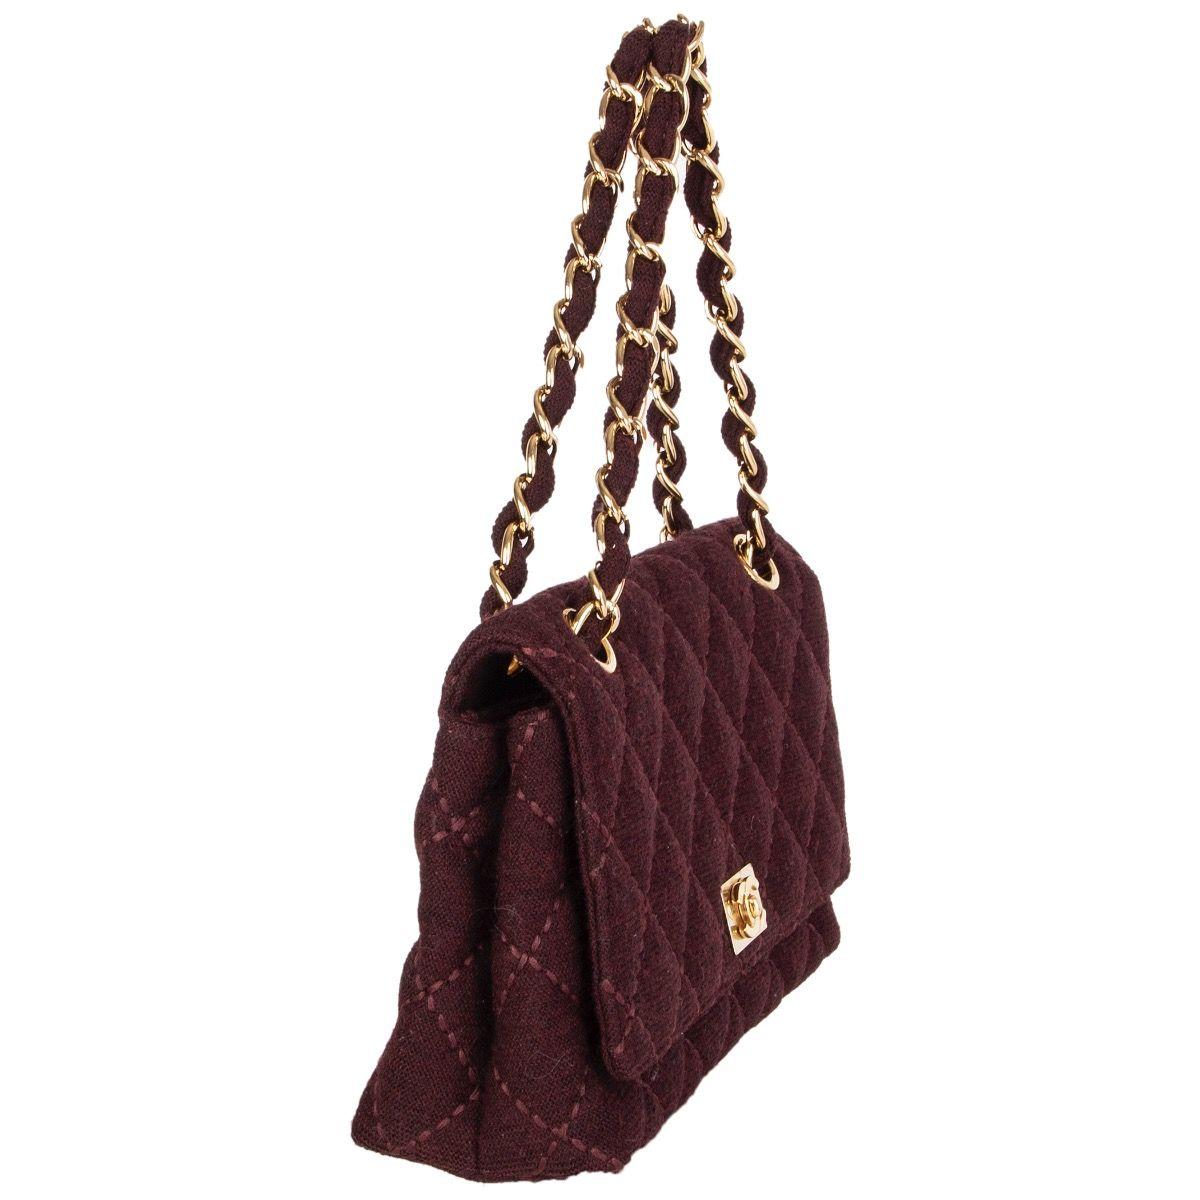 100% authentic Chanel vintage shoulder bag in burgundy wool jersey featuring light gold-tone chain strap and CC turn-lock. Lined in burgundy calfskin with a zipper pocket against the back and one open pocket against the front. Slip pocket on the